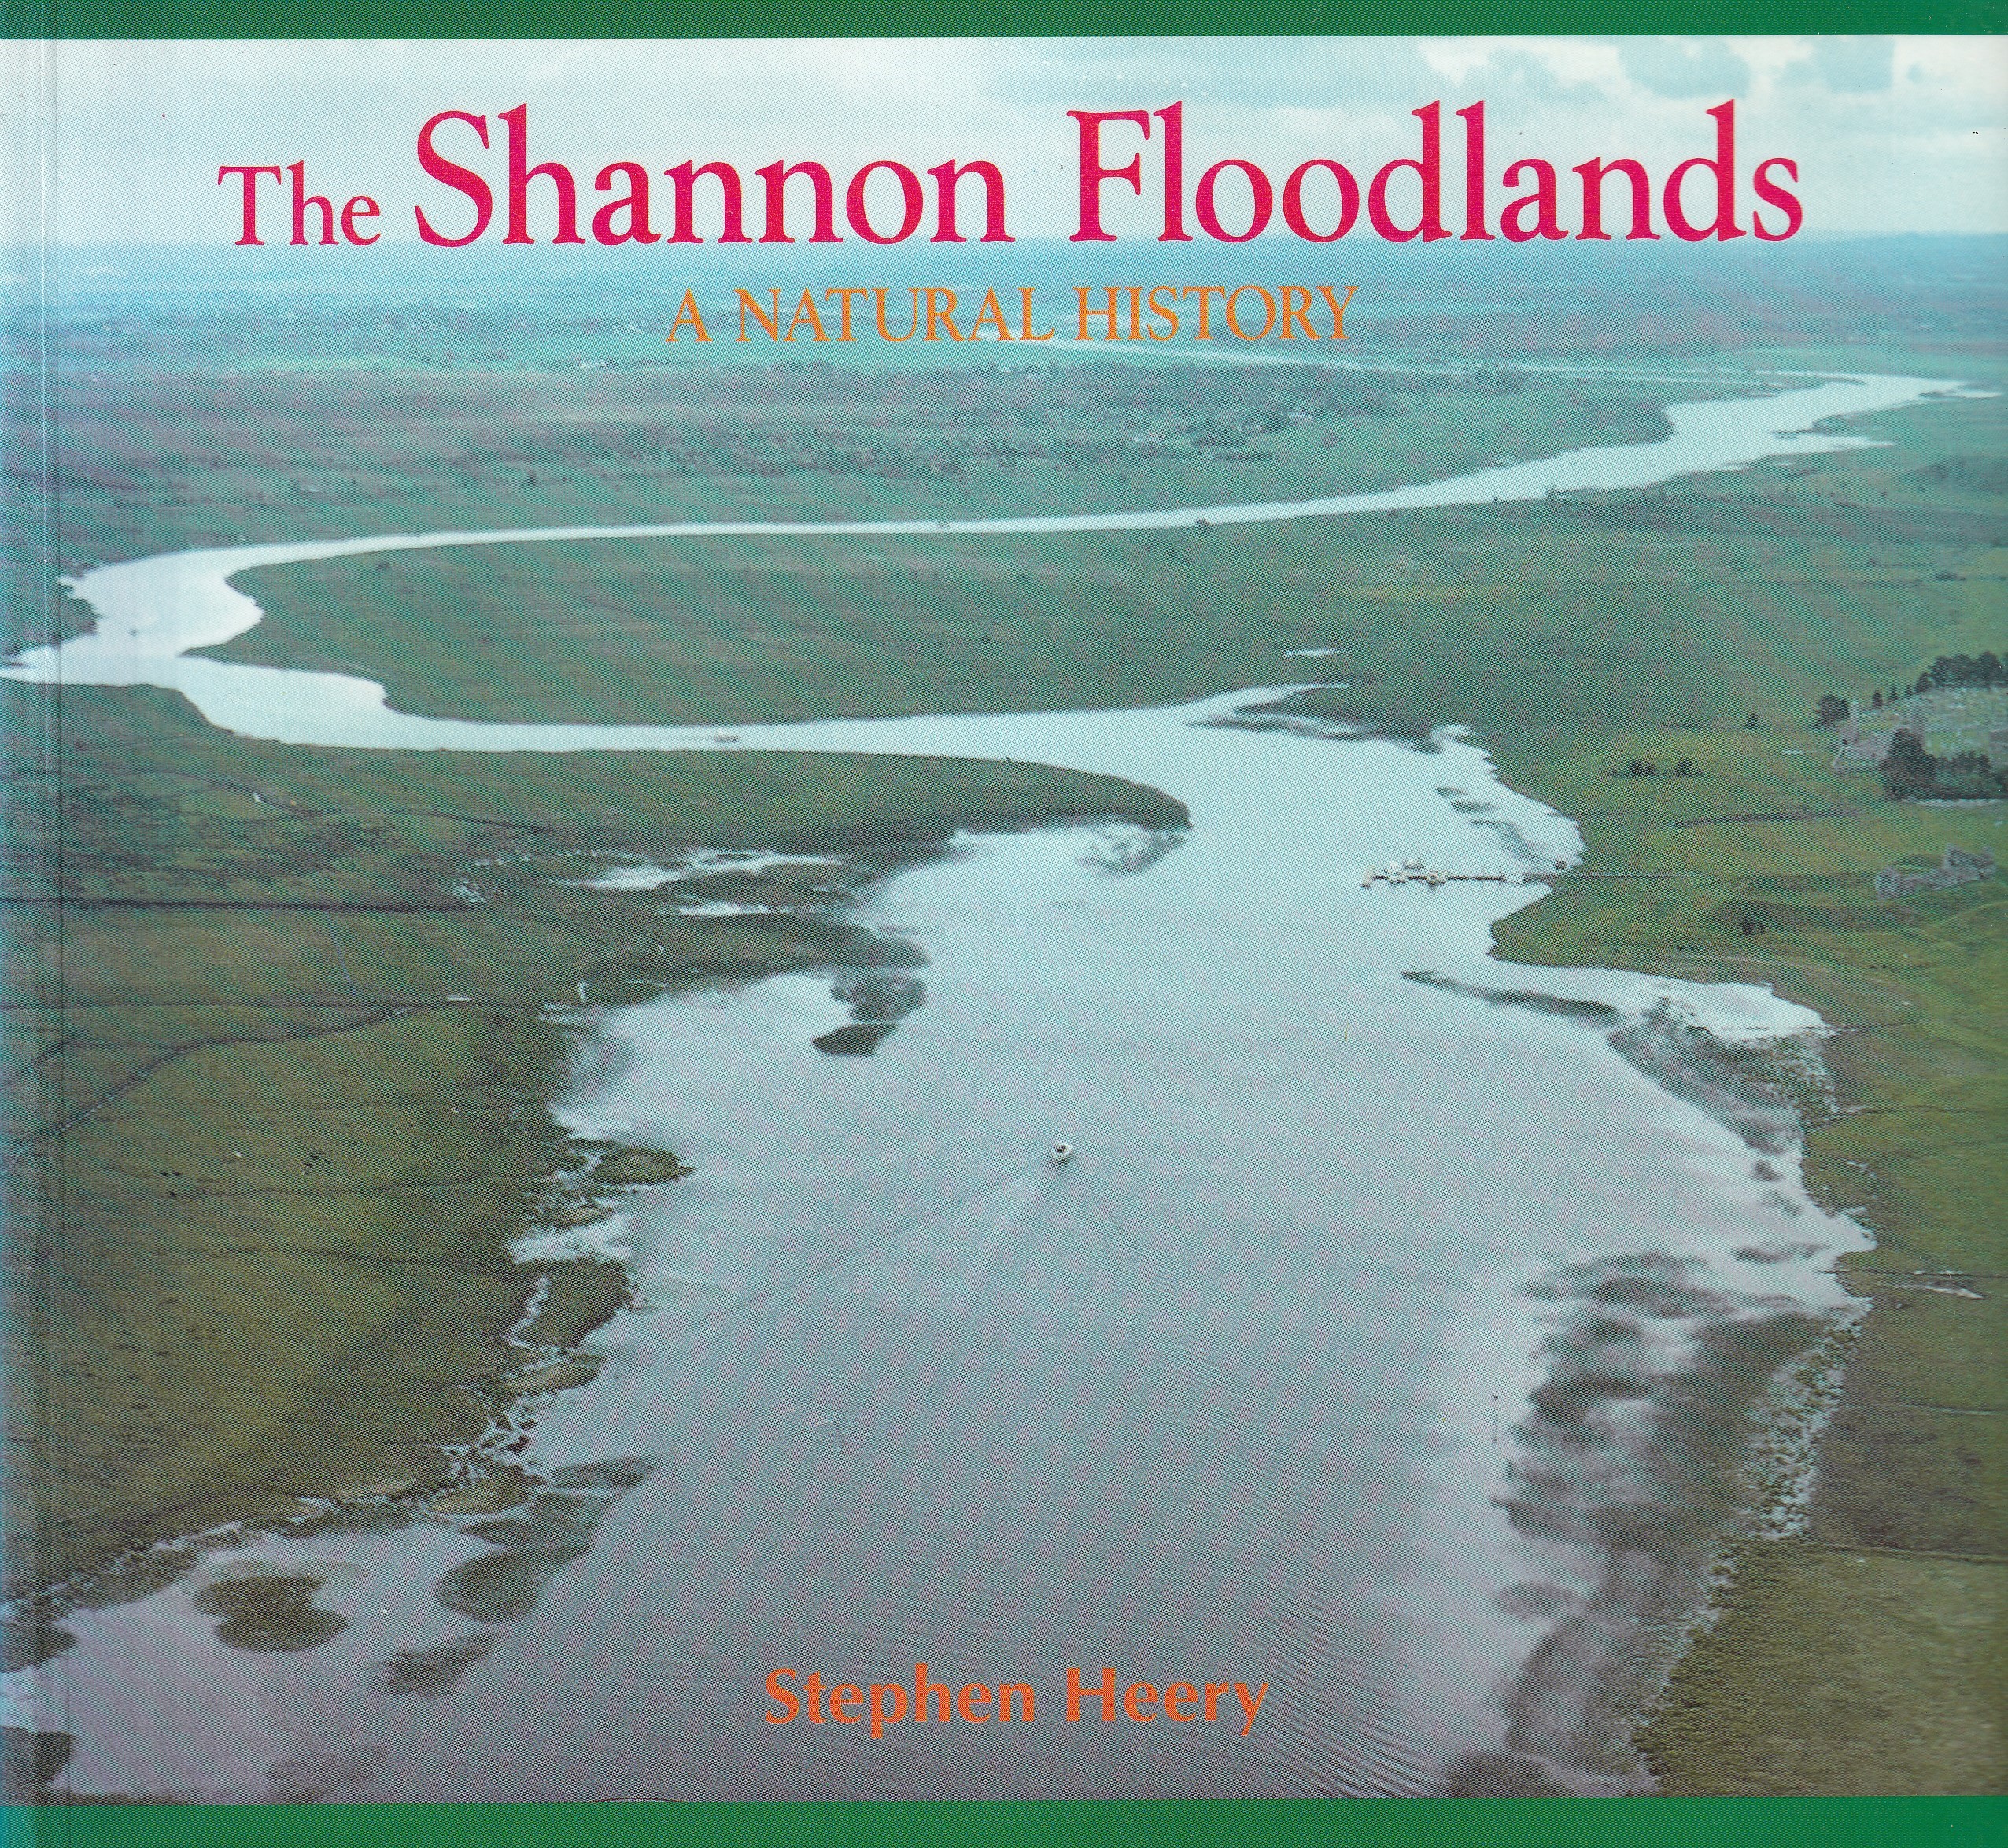 The Shannon Floodlands: A Natural History by Stephen Heery